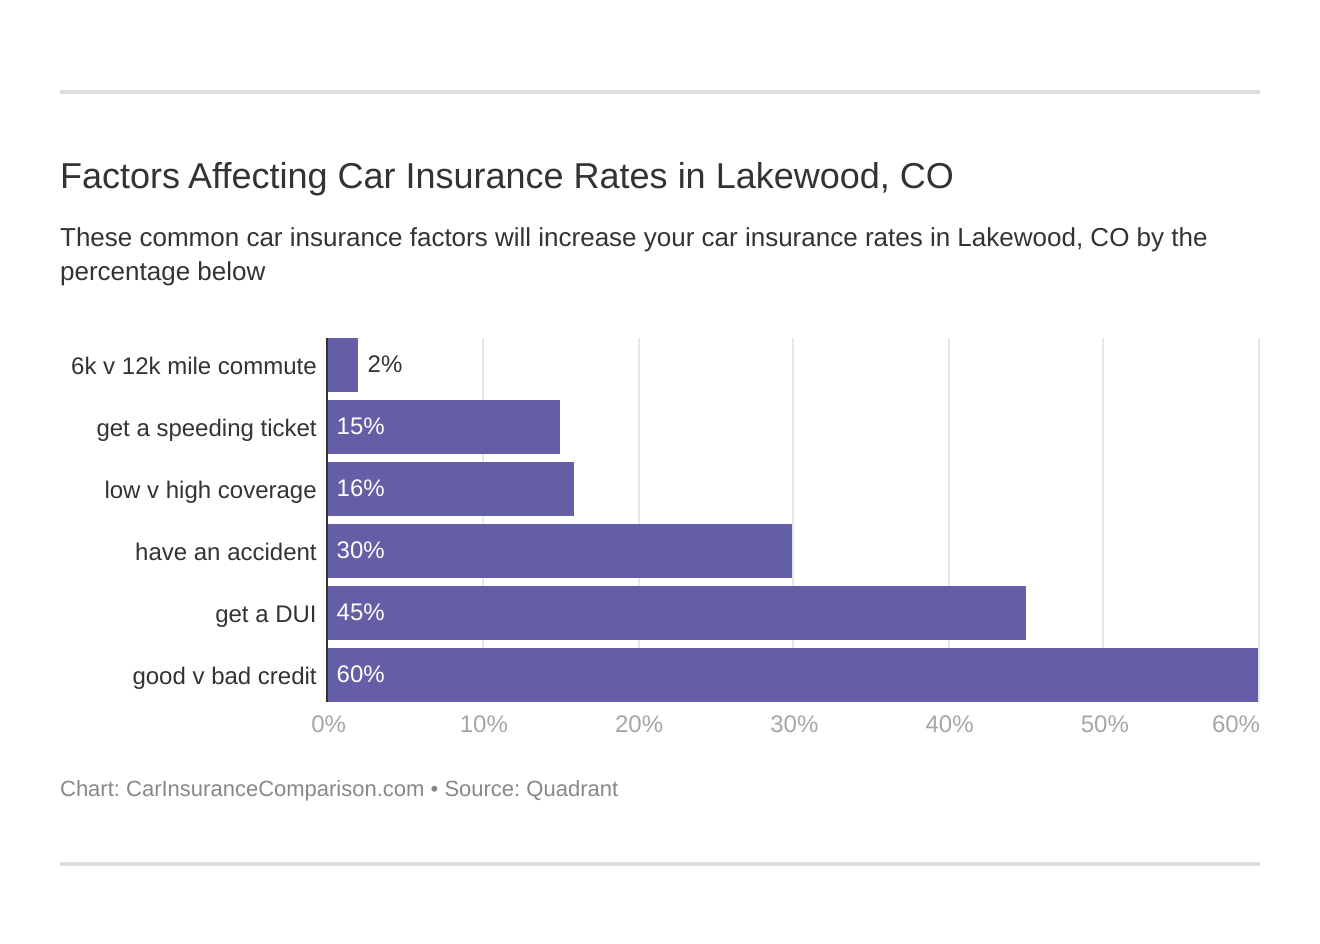 Factors Affecting Car Insurance Rates in Lakewood, CO